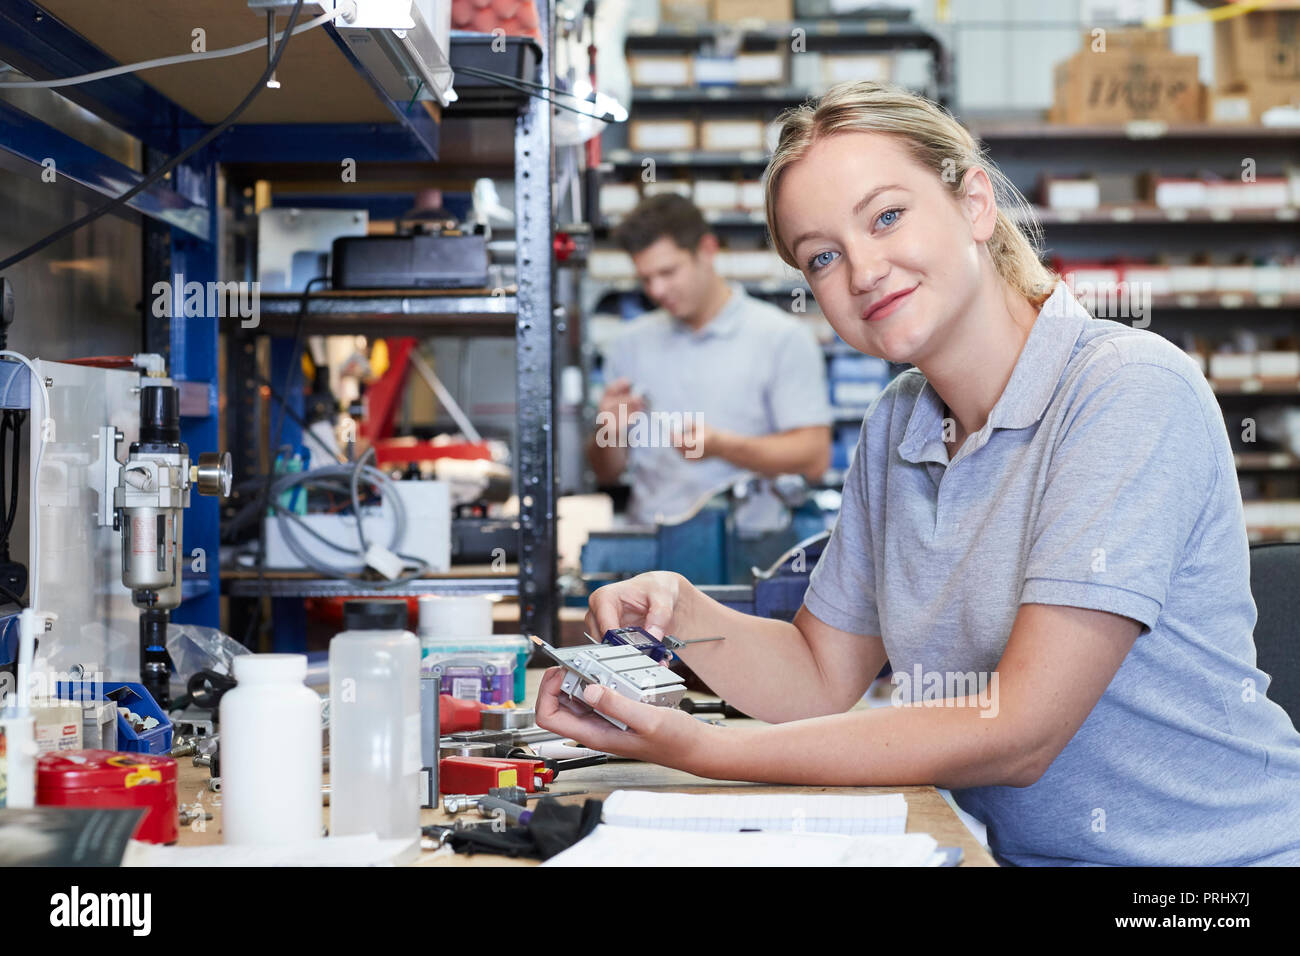 Portrait Of Female Engineer In Factory Measuring Component At Work Bench Using Micrometer Stock Photo